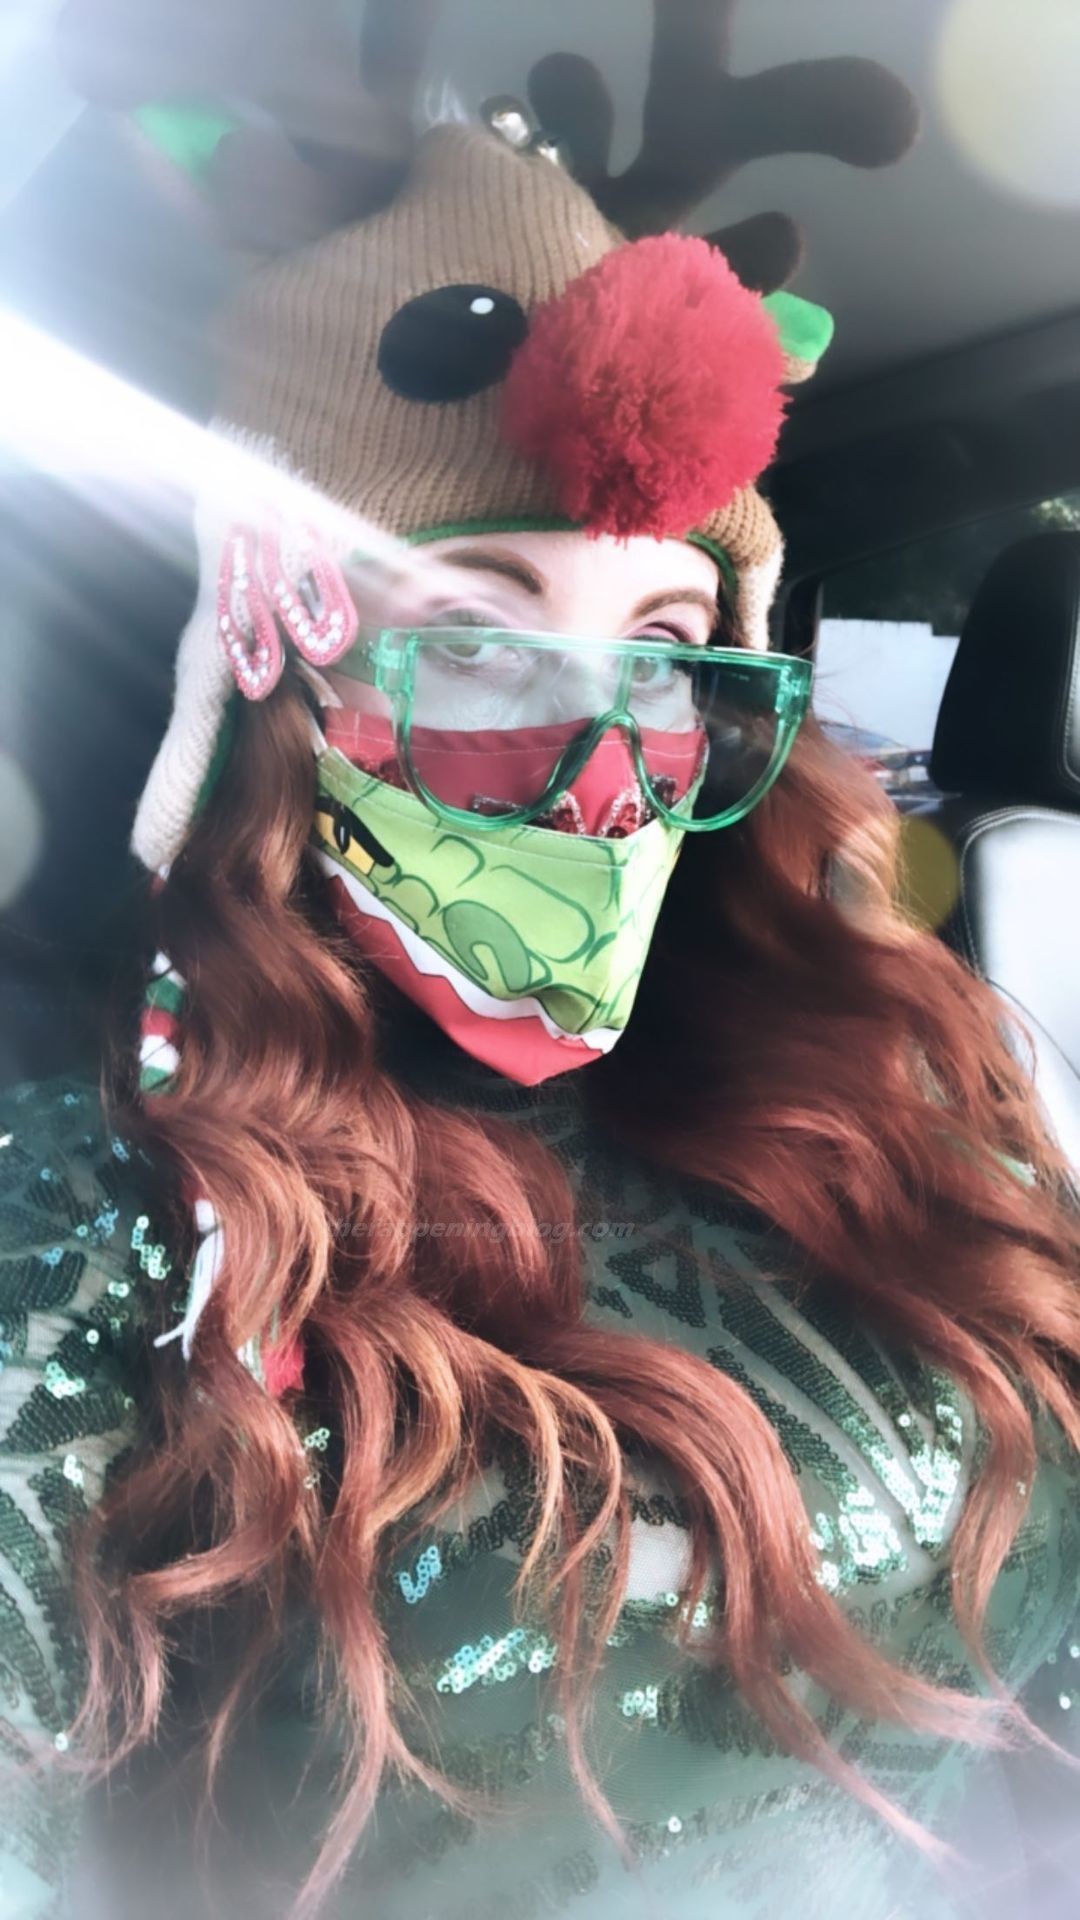 Phoebe Price Poses in a See-Through Christmas Outfit (22 Photos)